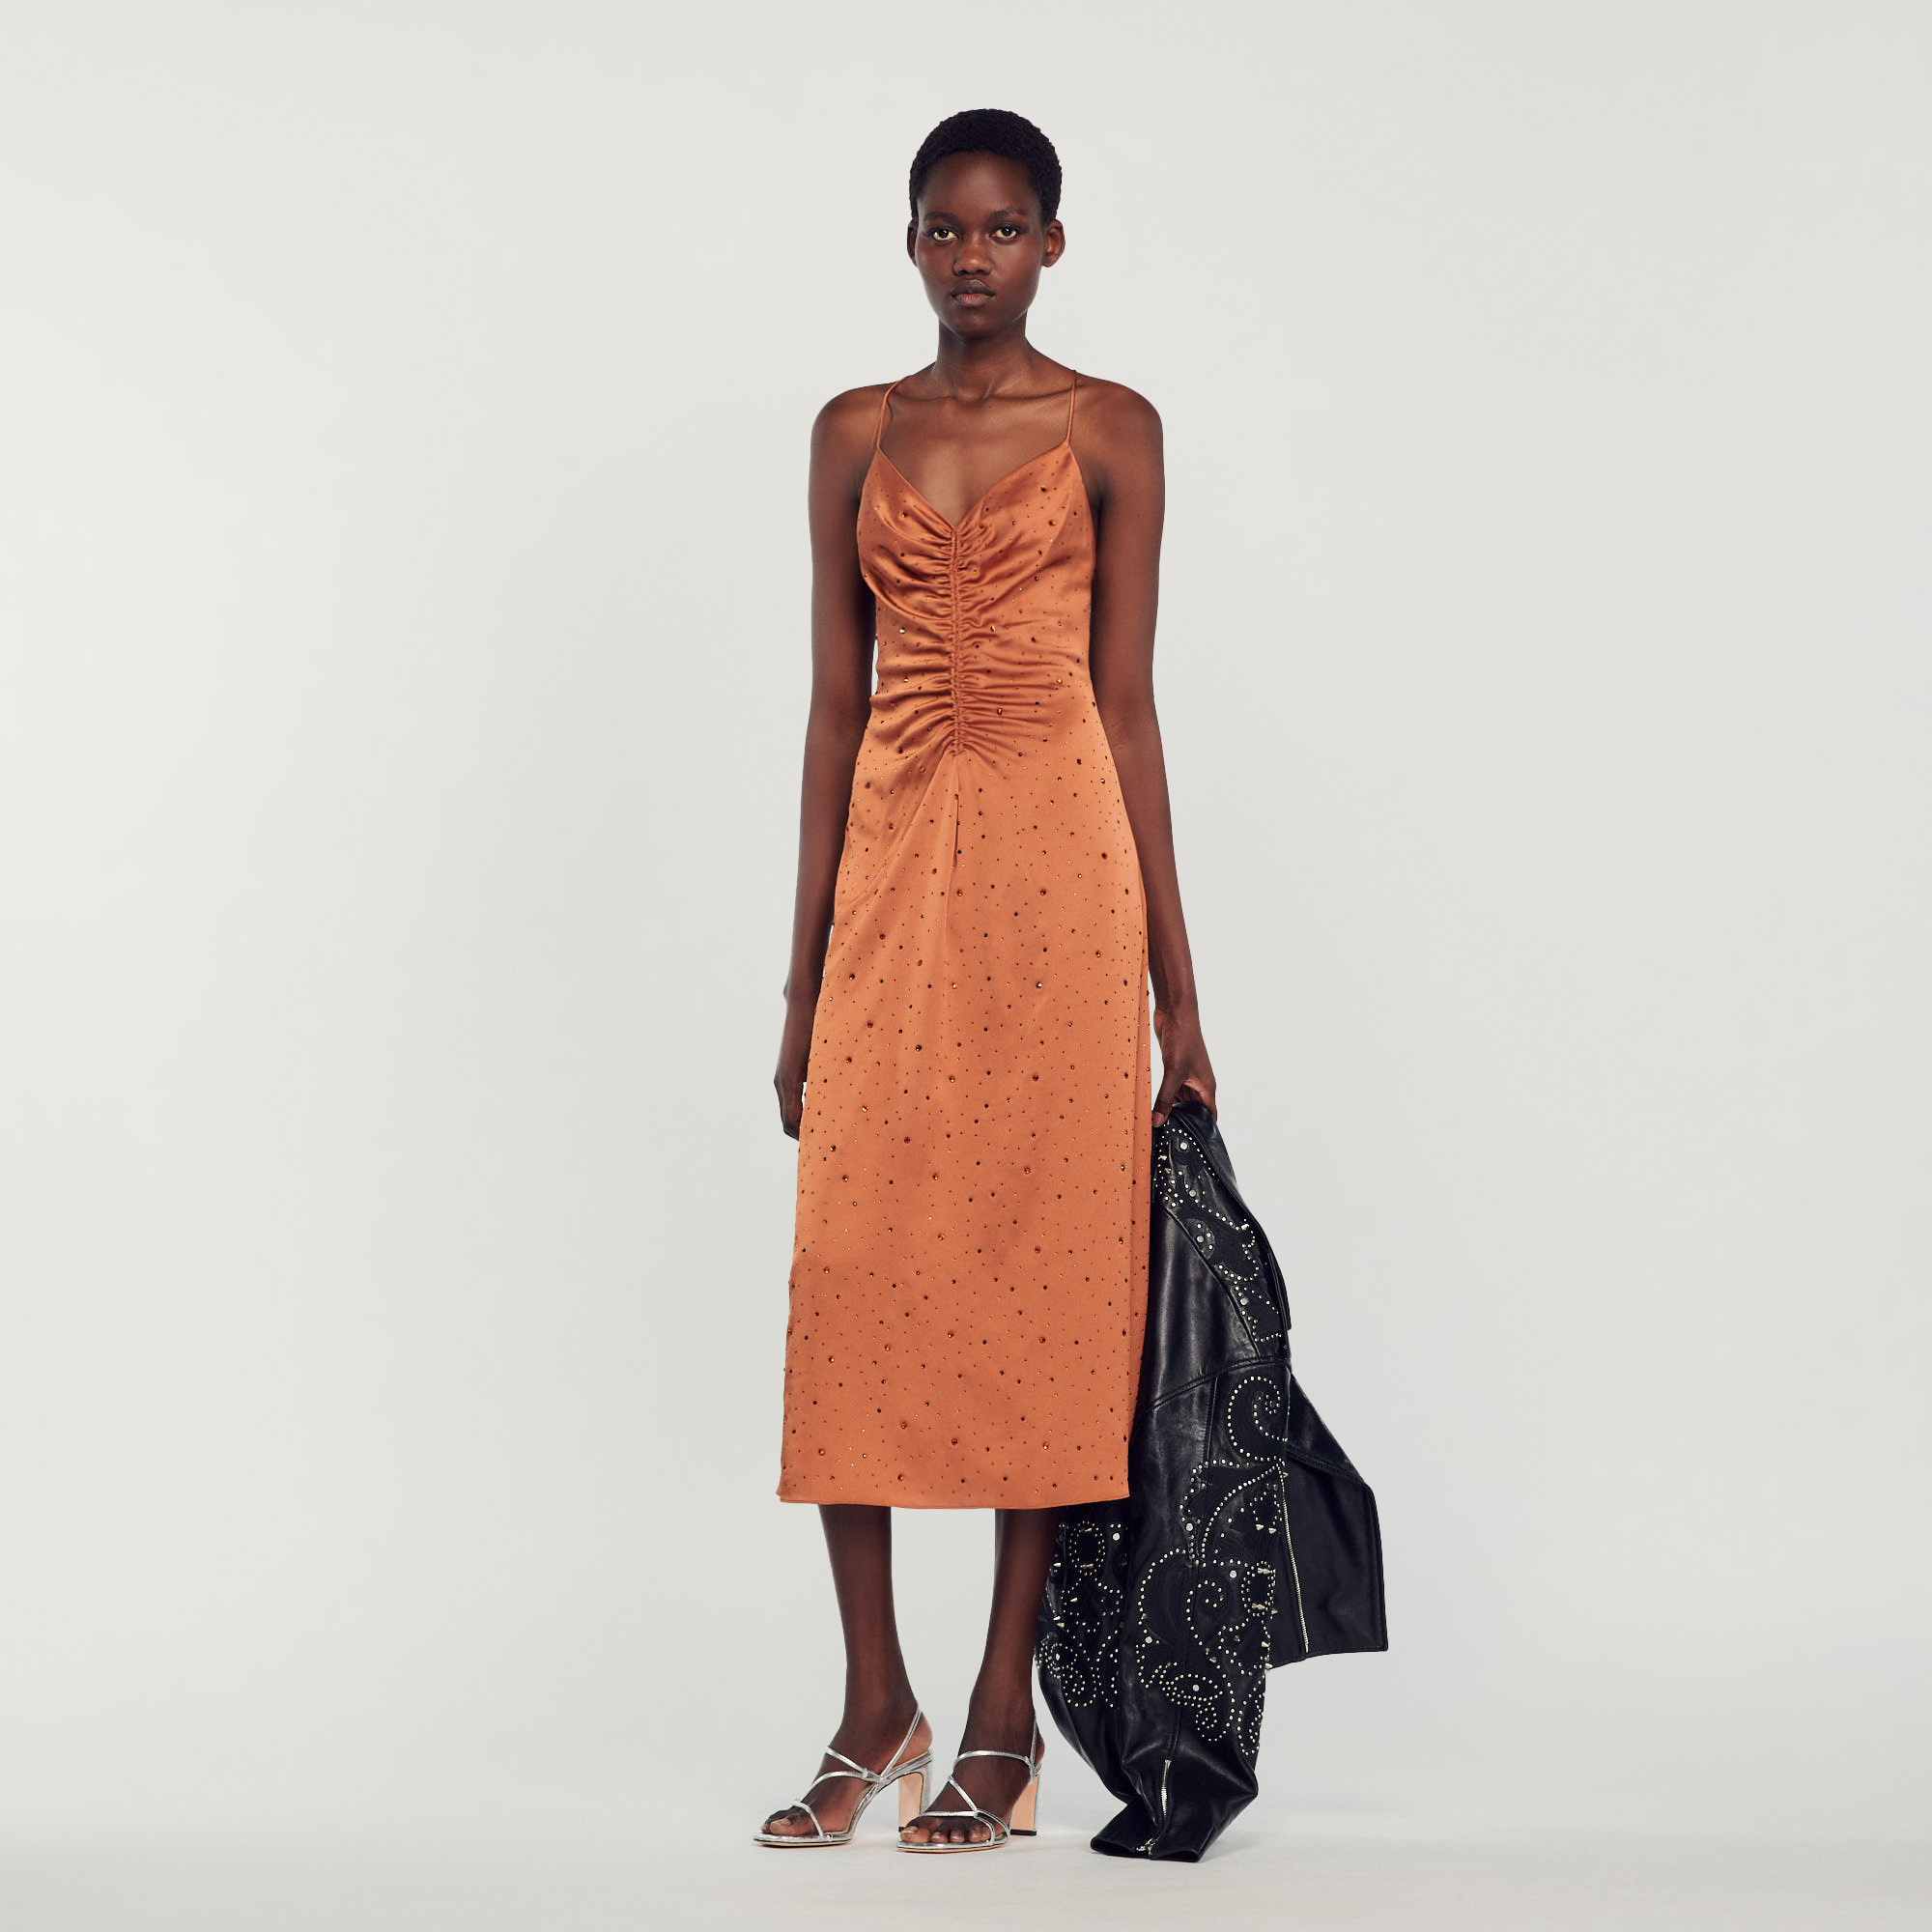 Sandro polyester Diamante: Long dress with a flared skirt, thin crossover straps tied at the back, a gathered plunging neckline, and all-over rhinestones